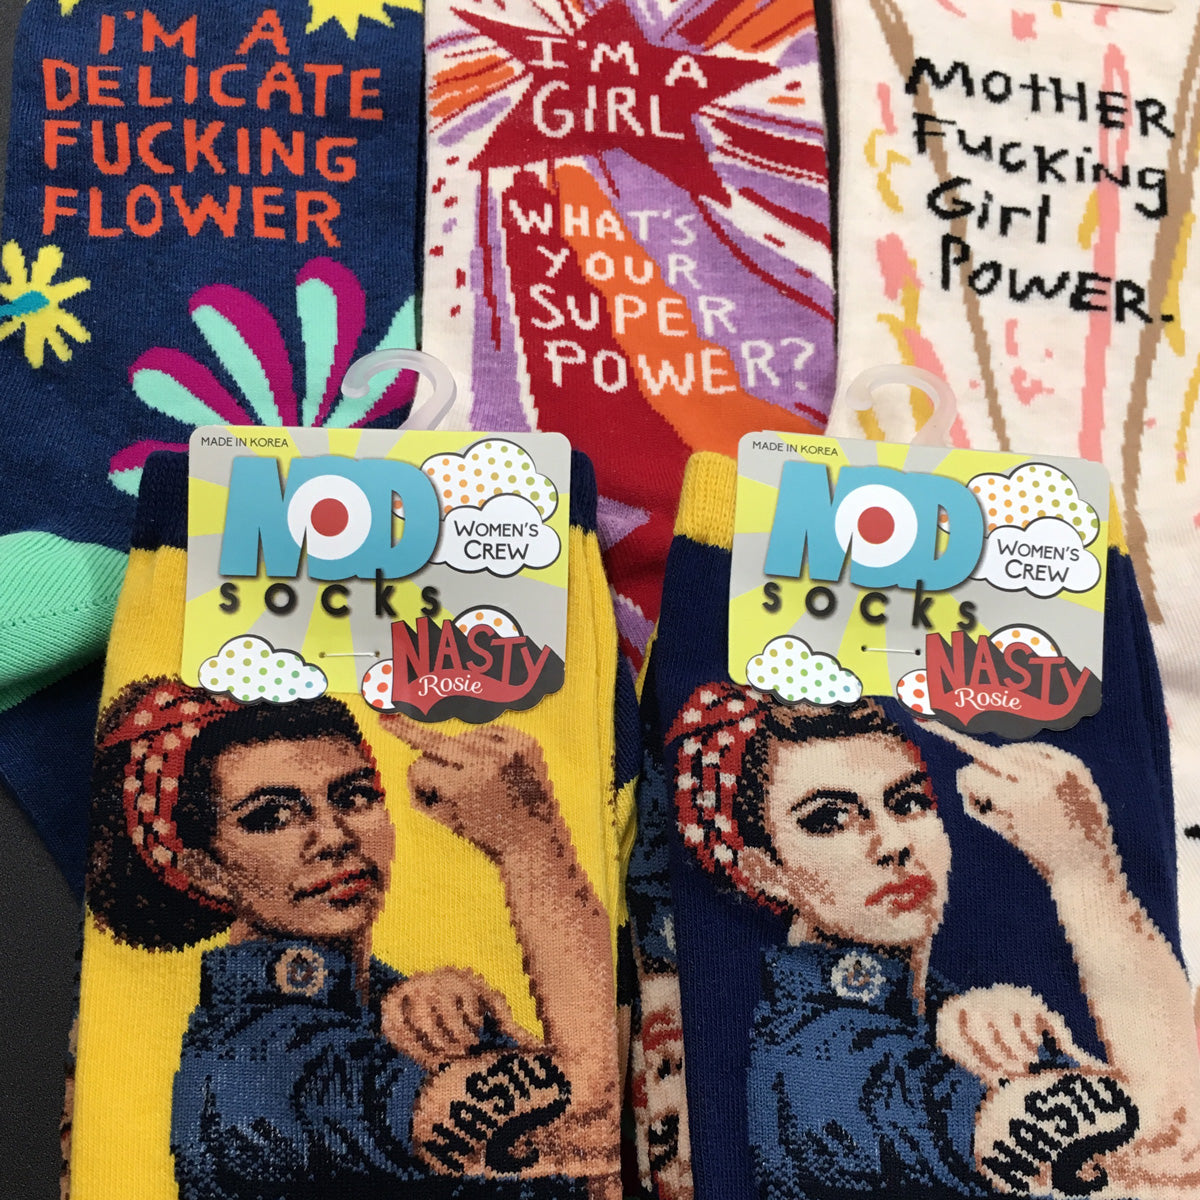 ModSocks' Rosie the Riveter Socks & sassy swear word socks by Blue Q are part of our Girl Power Socks collection.